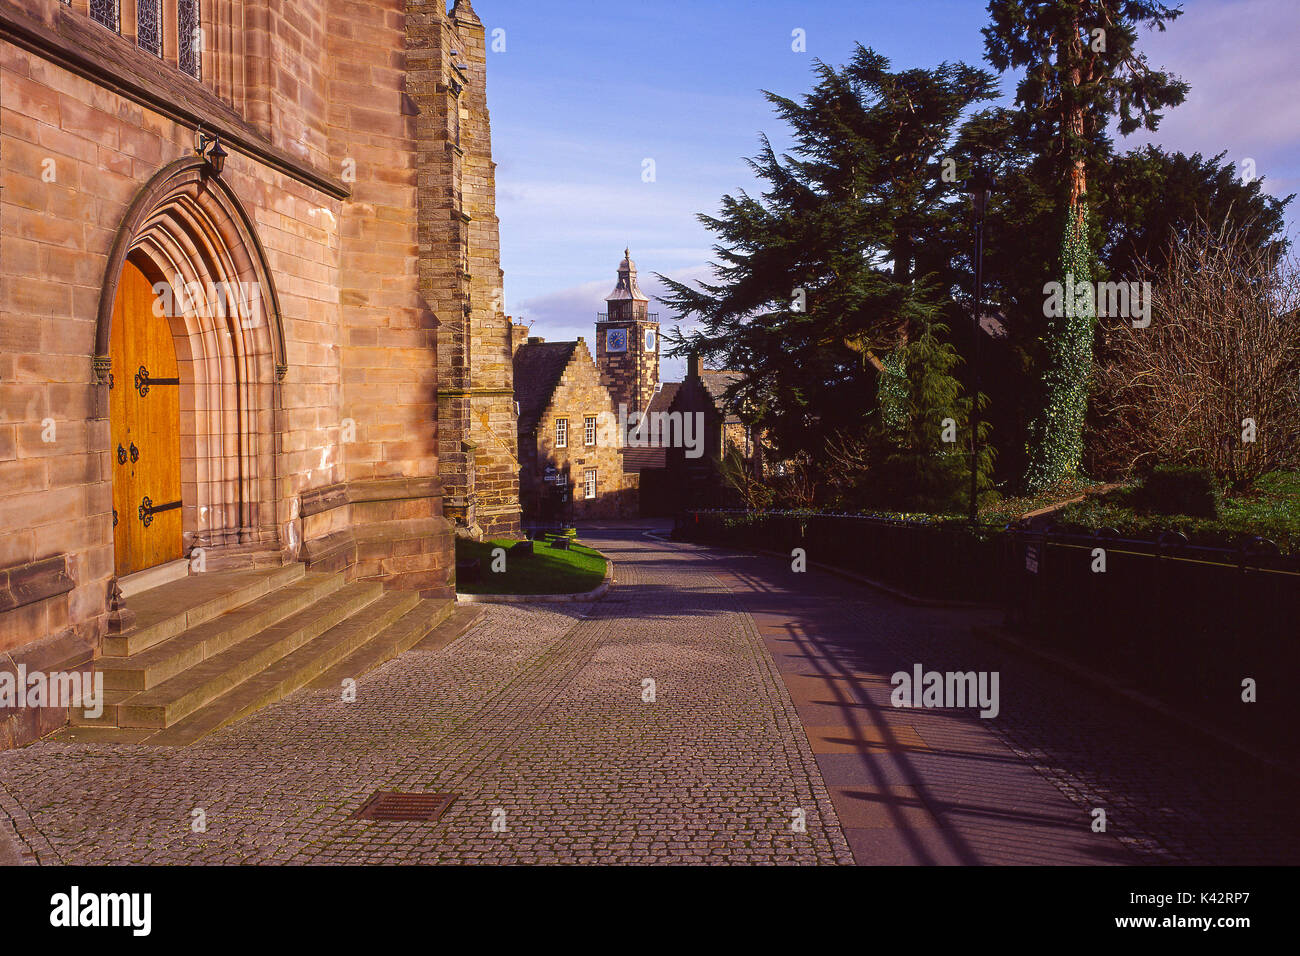 Chiesa dell'Holyrood, storica Stirling Foto Stock